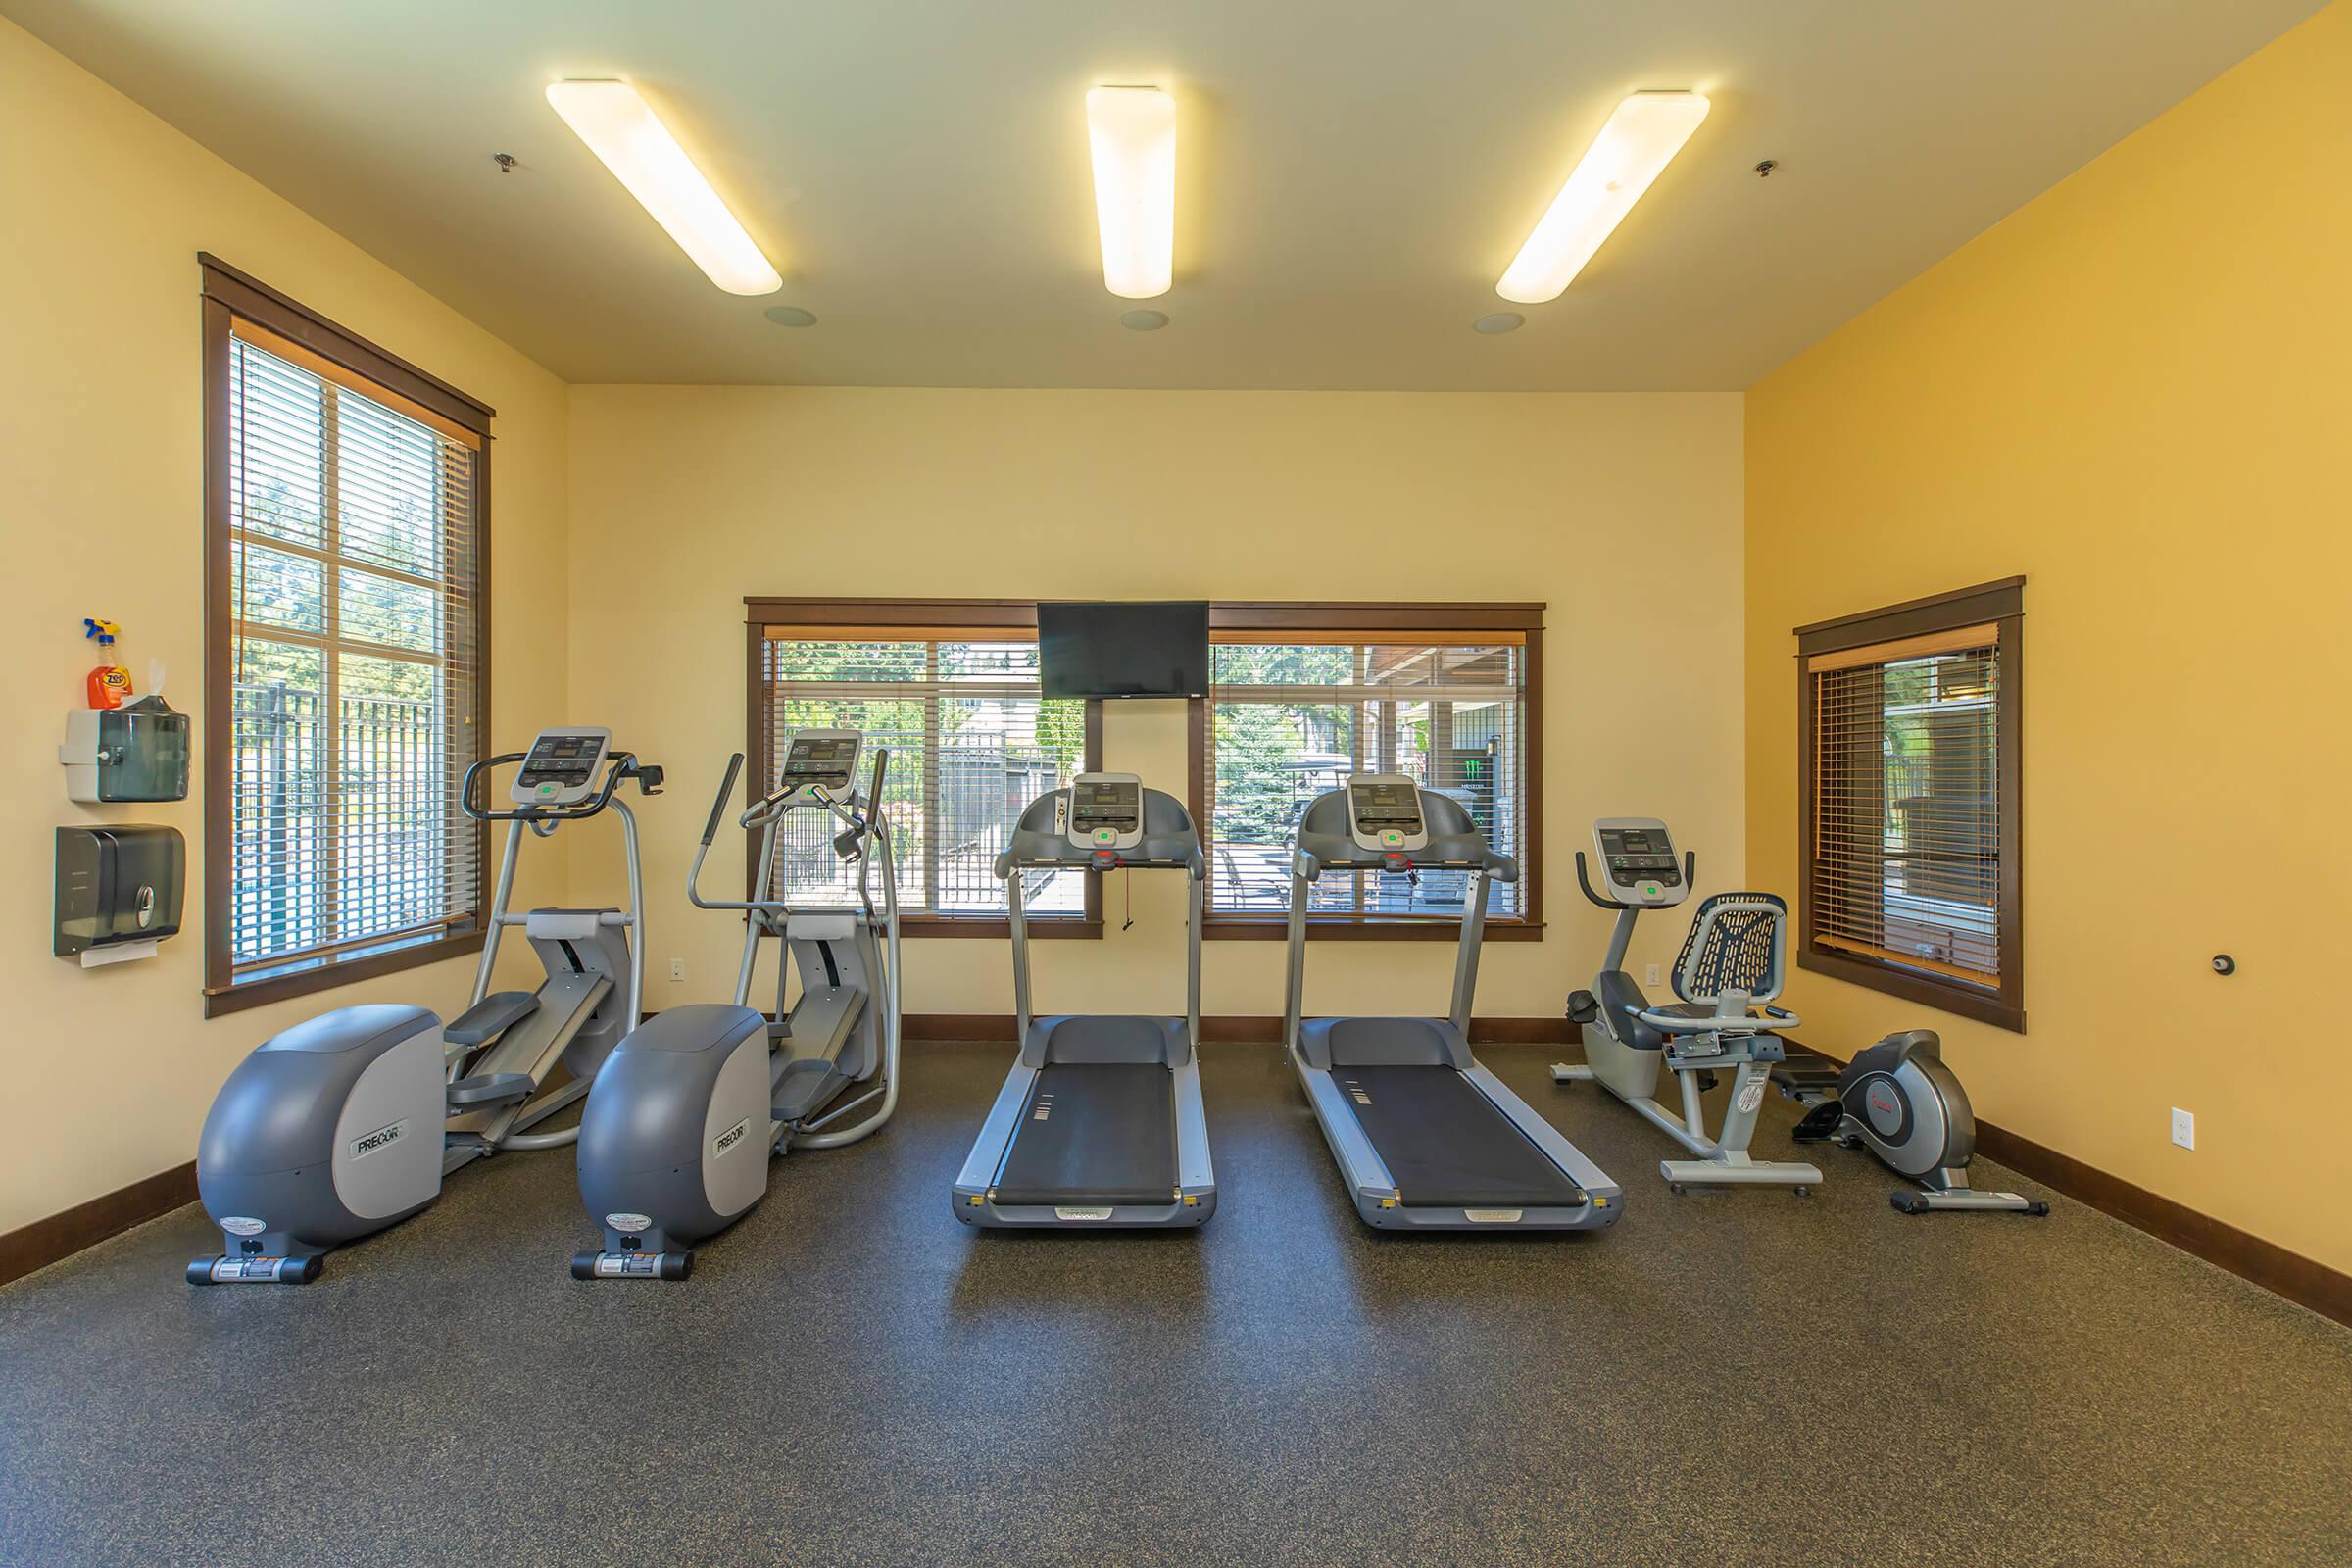 BUILD UP A SWEAT ANYTIME IN THE 24-HOUR FITNESS CENTER